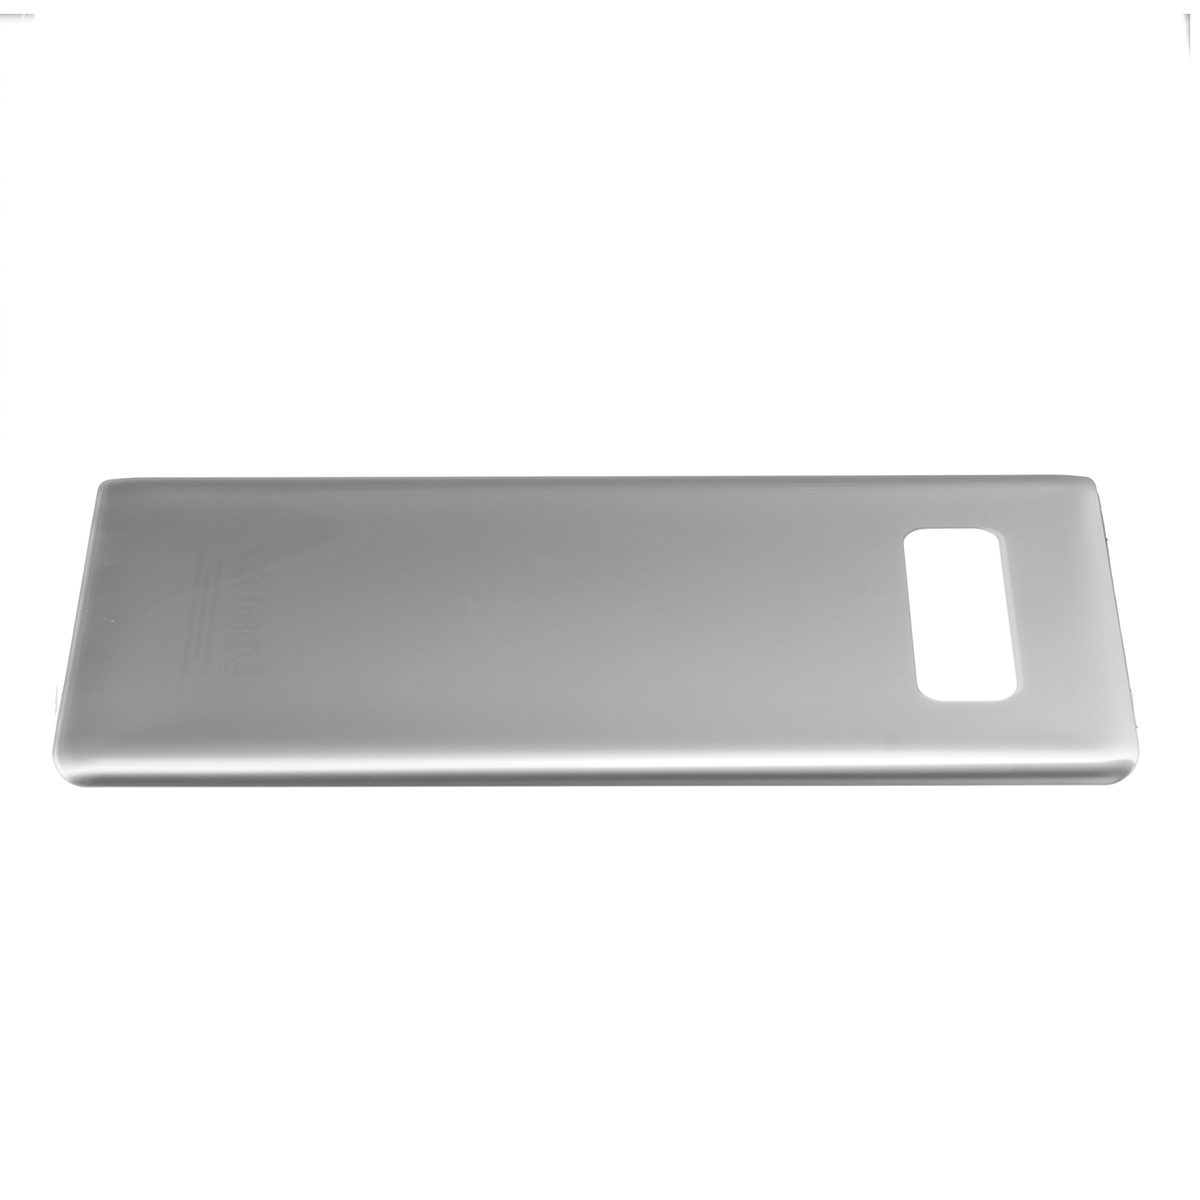 Back-Glass-Battery-Cover-With-Camera-Lens-Frame-for-Samsung-Galaxy-Note-8-1330642-4